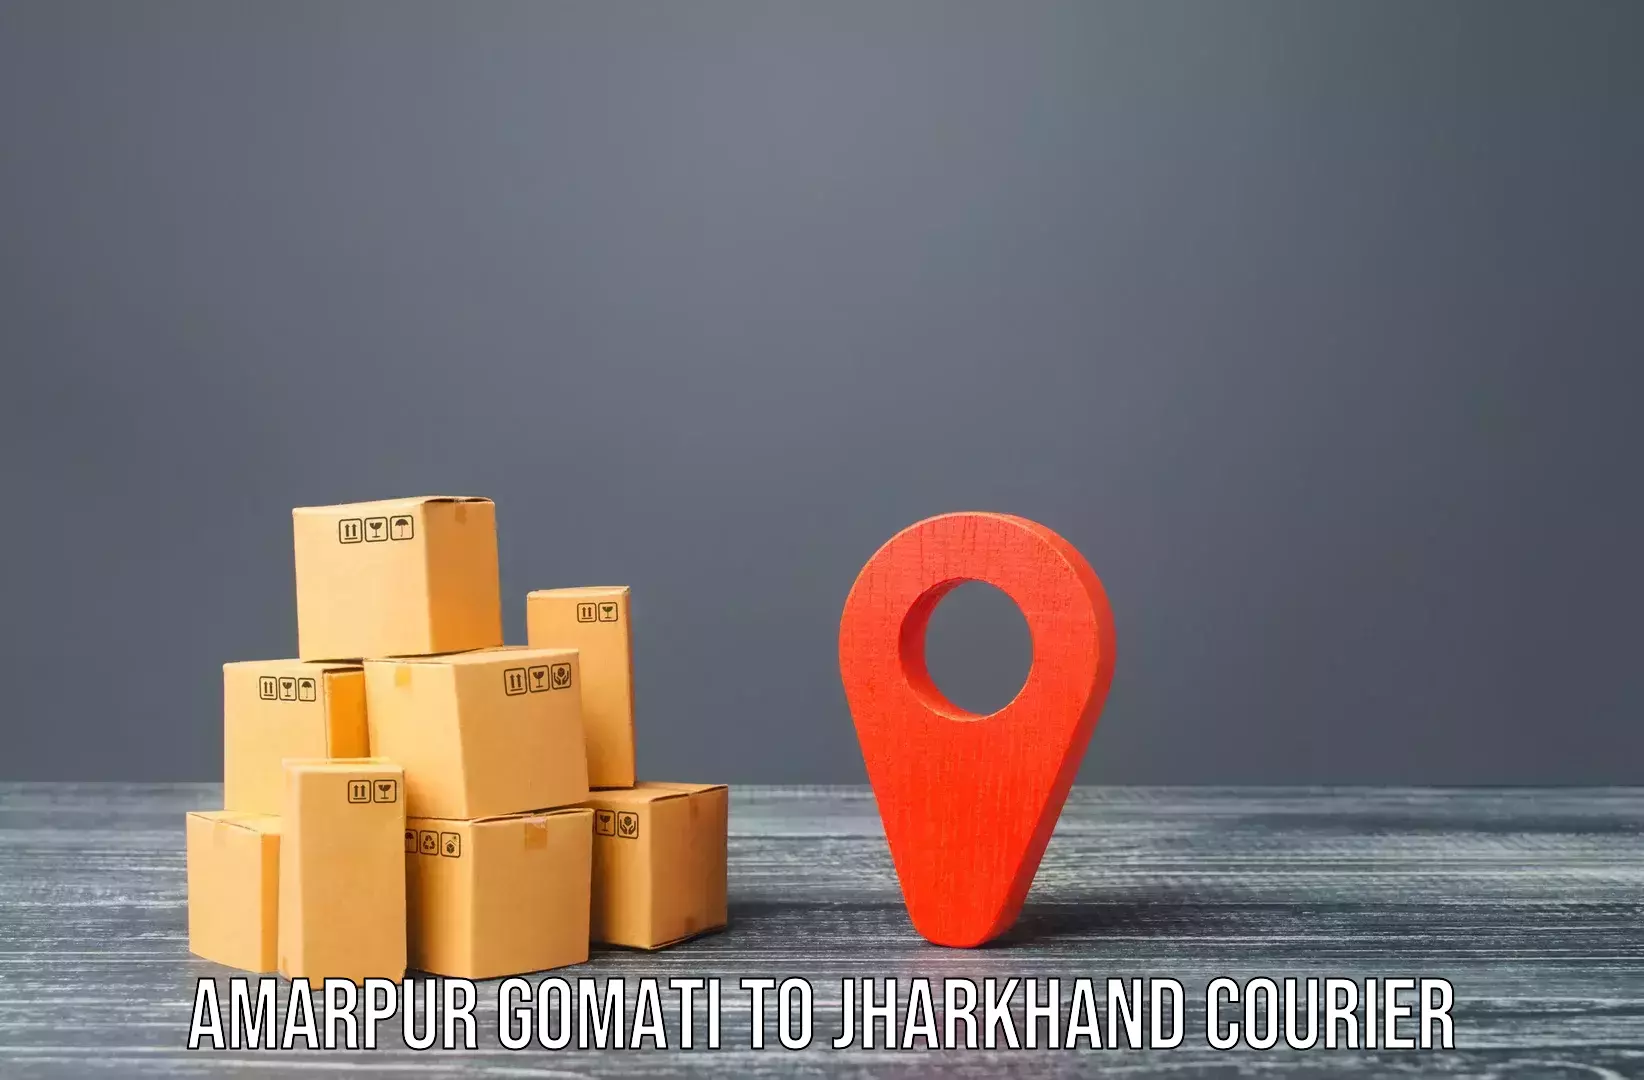 Reliable household shifting in Amarpur Gomati to Dhanbad